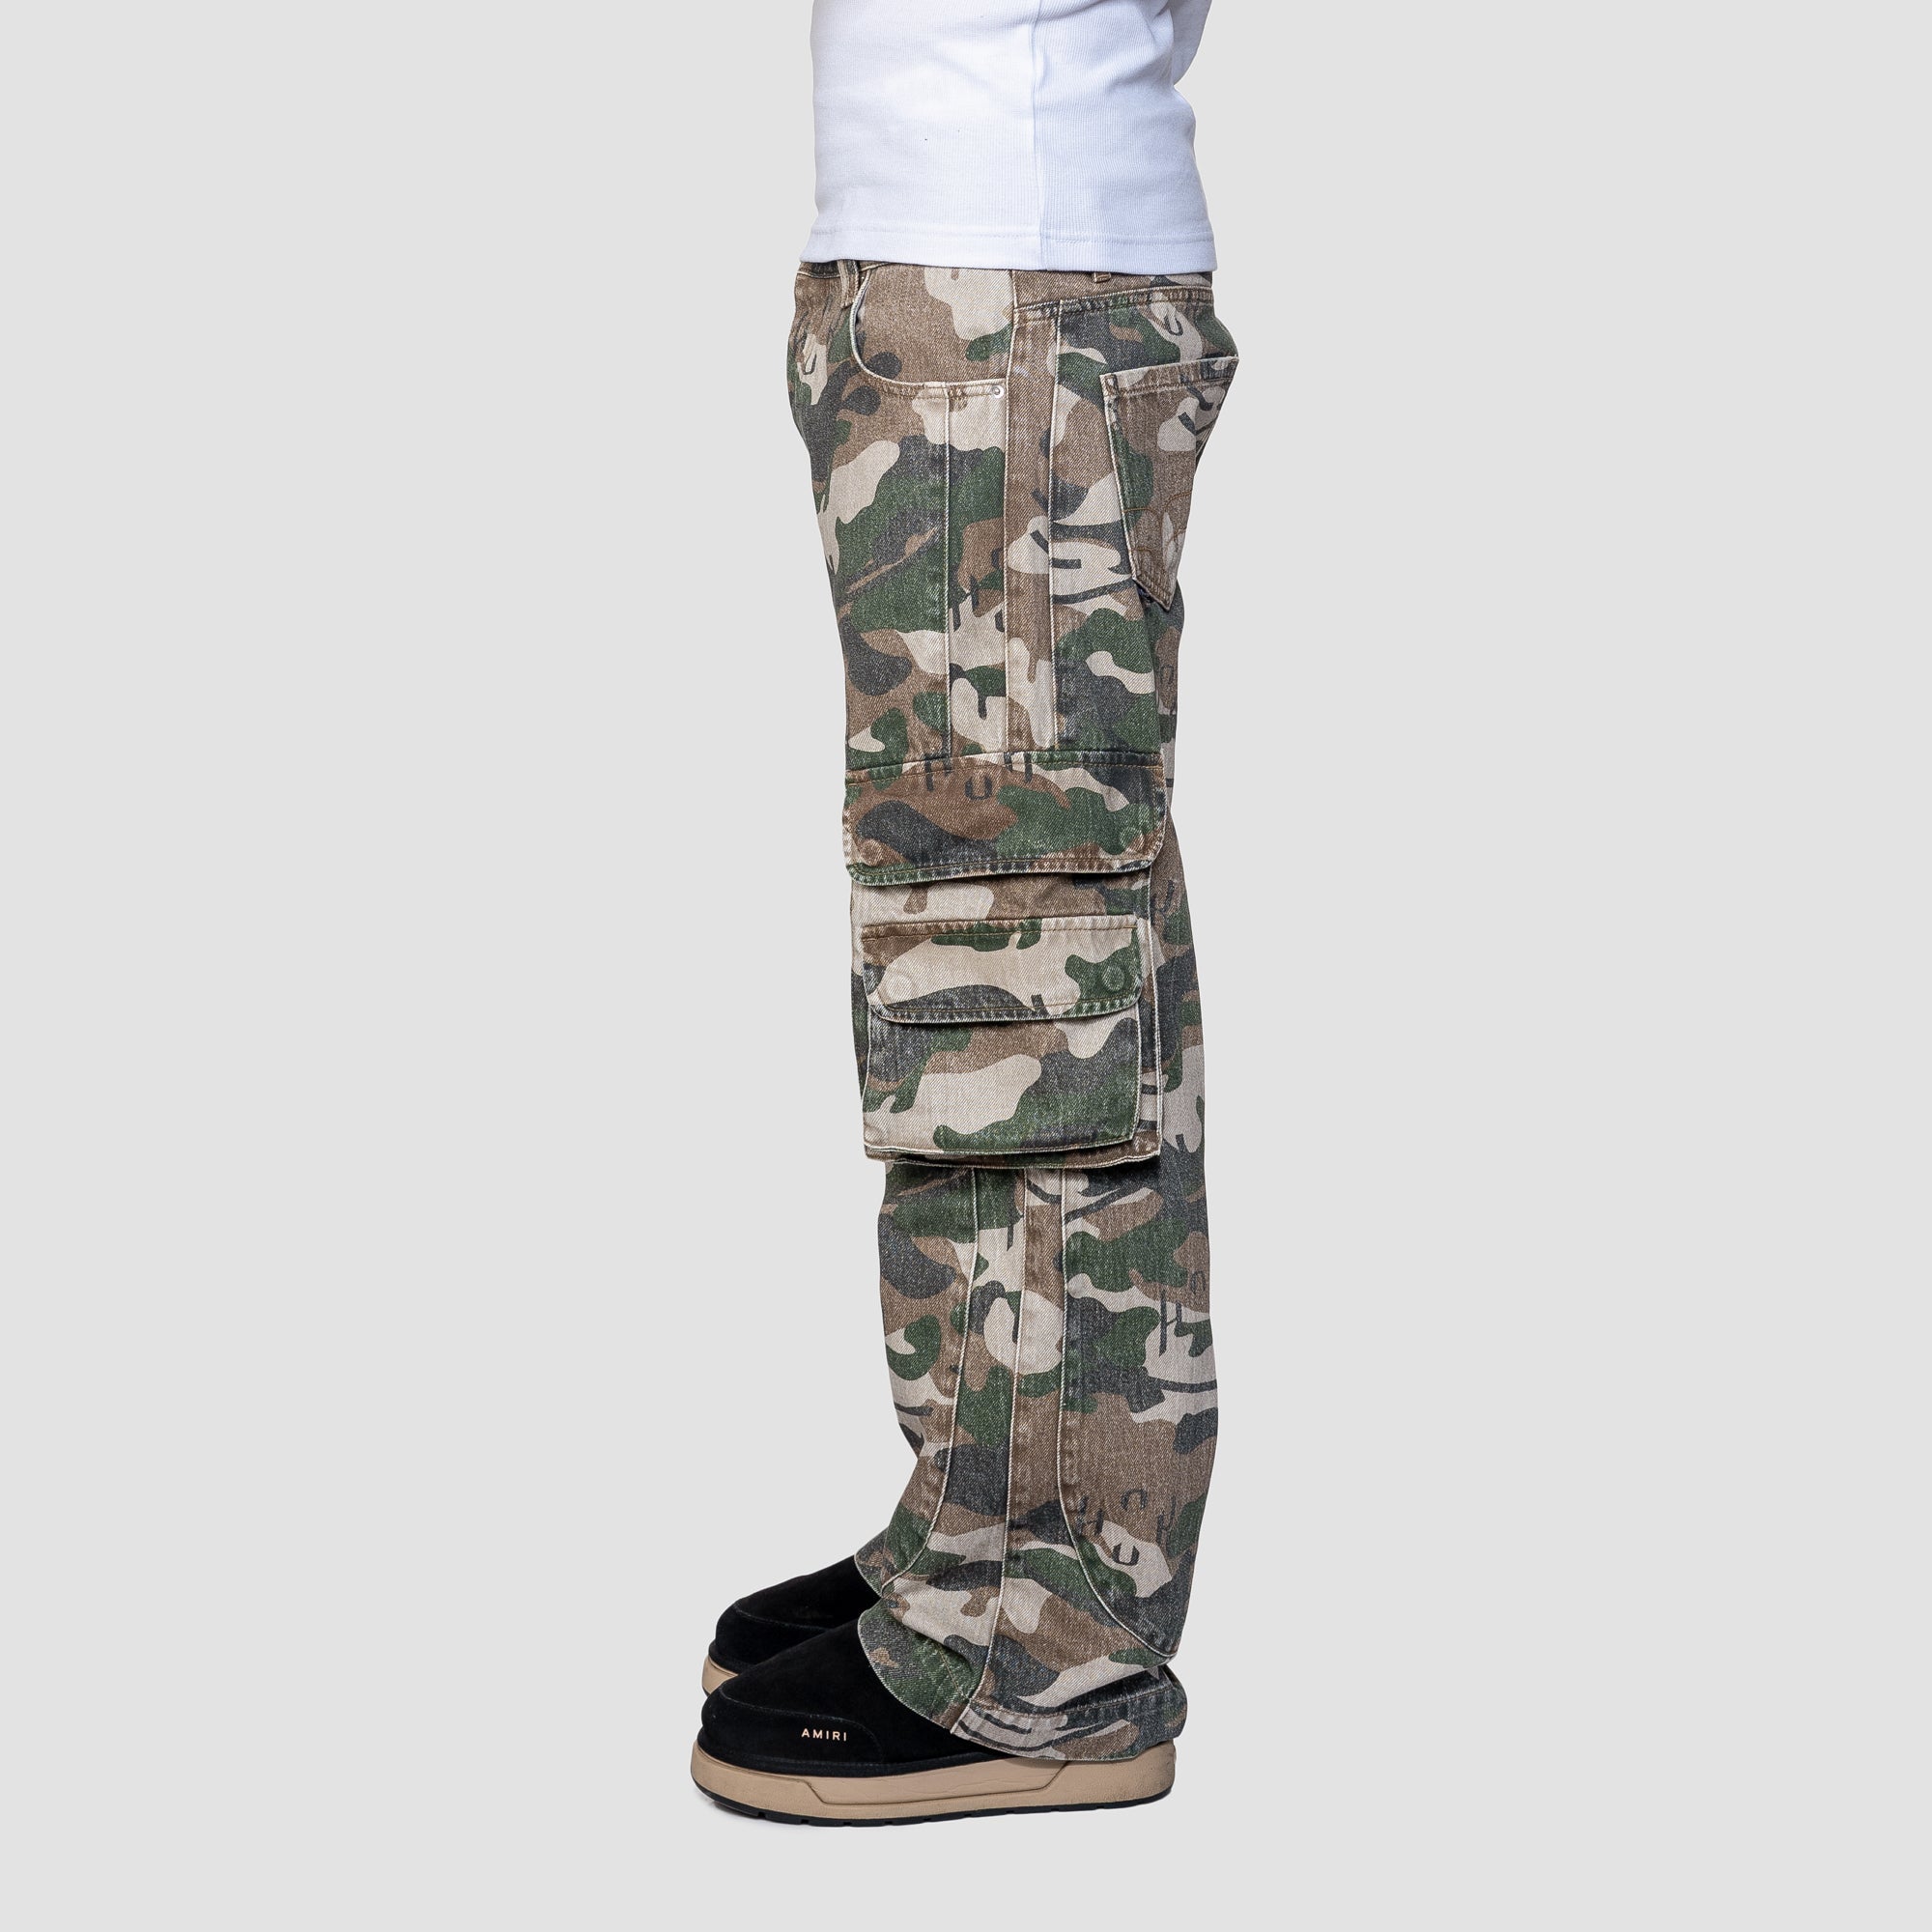 CAMOUFLAGE CARGO BAGGY